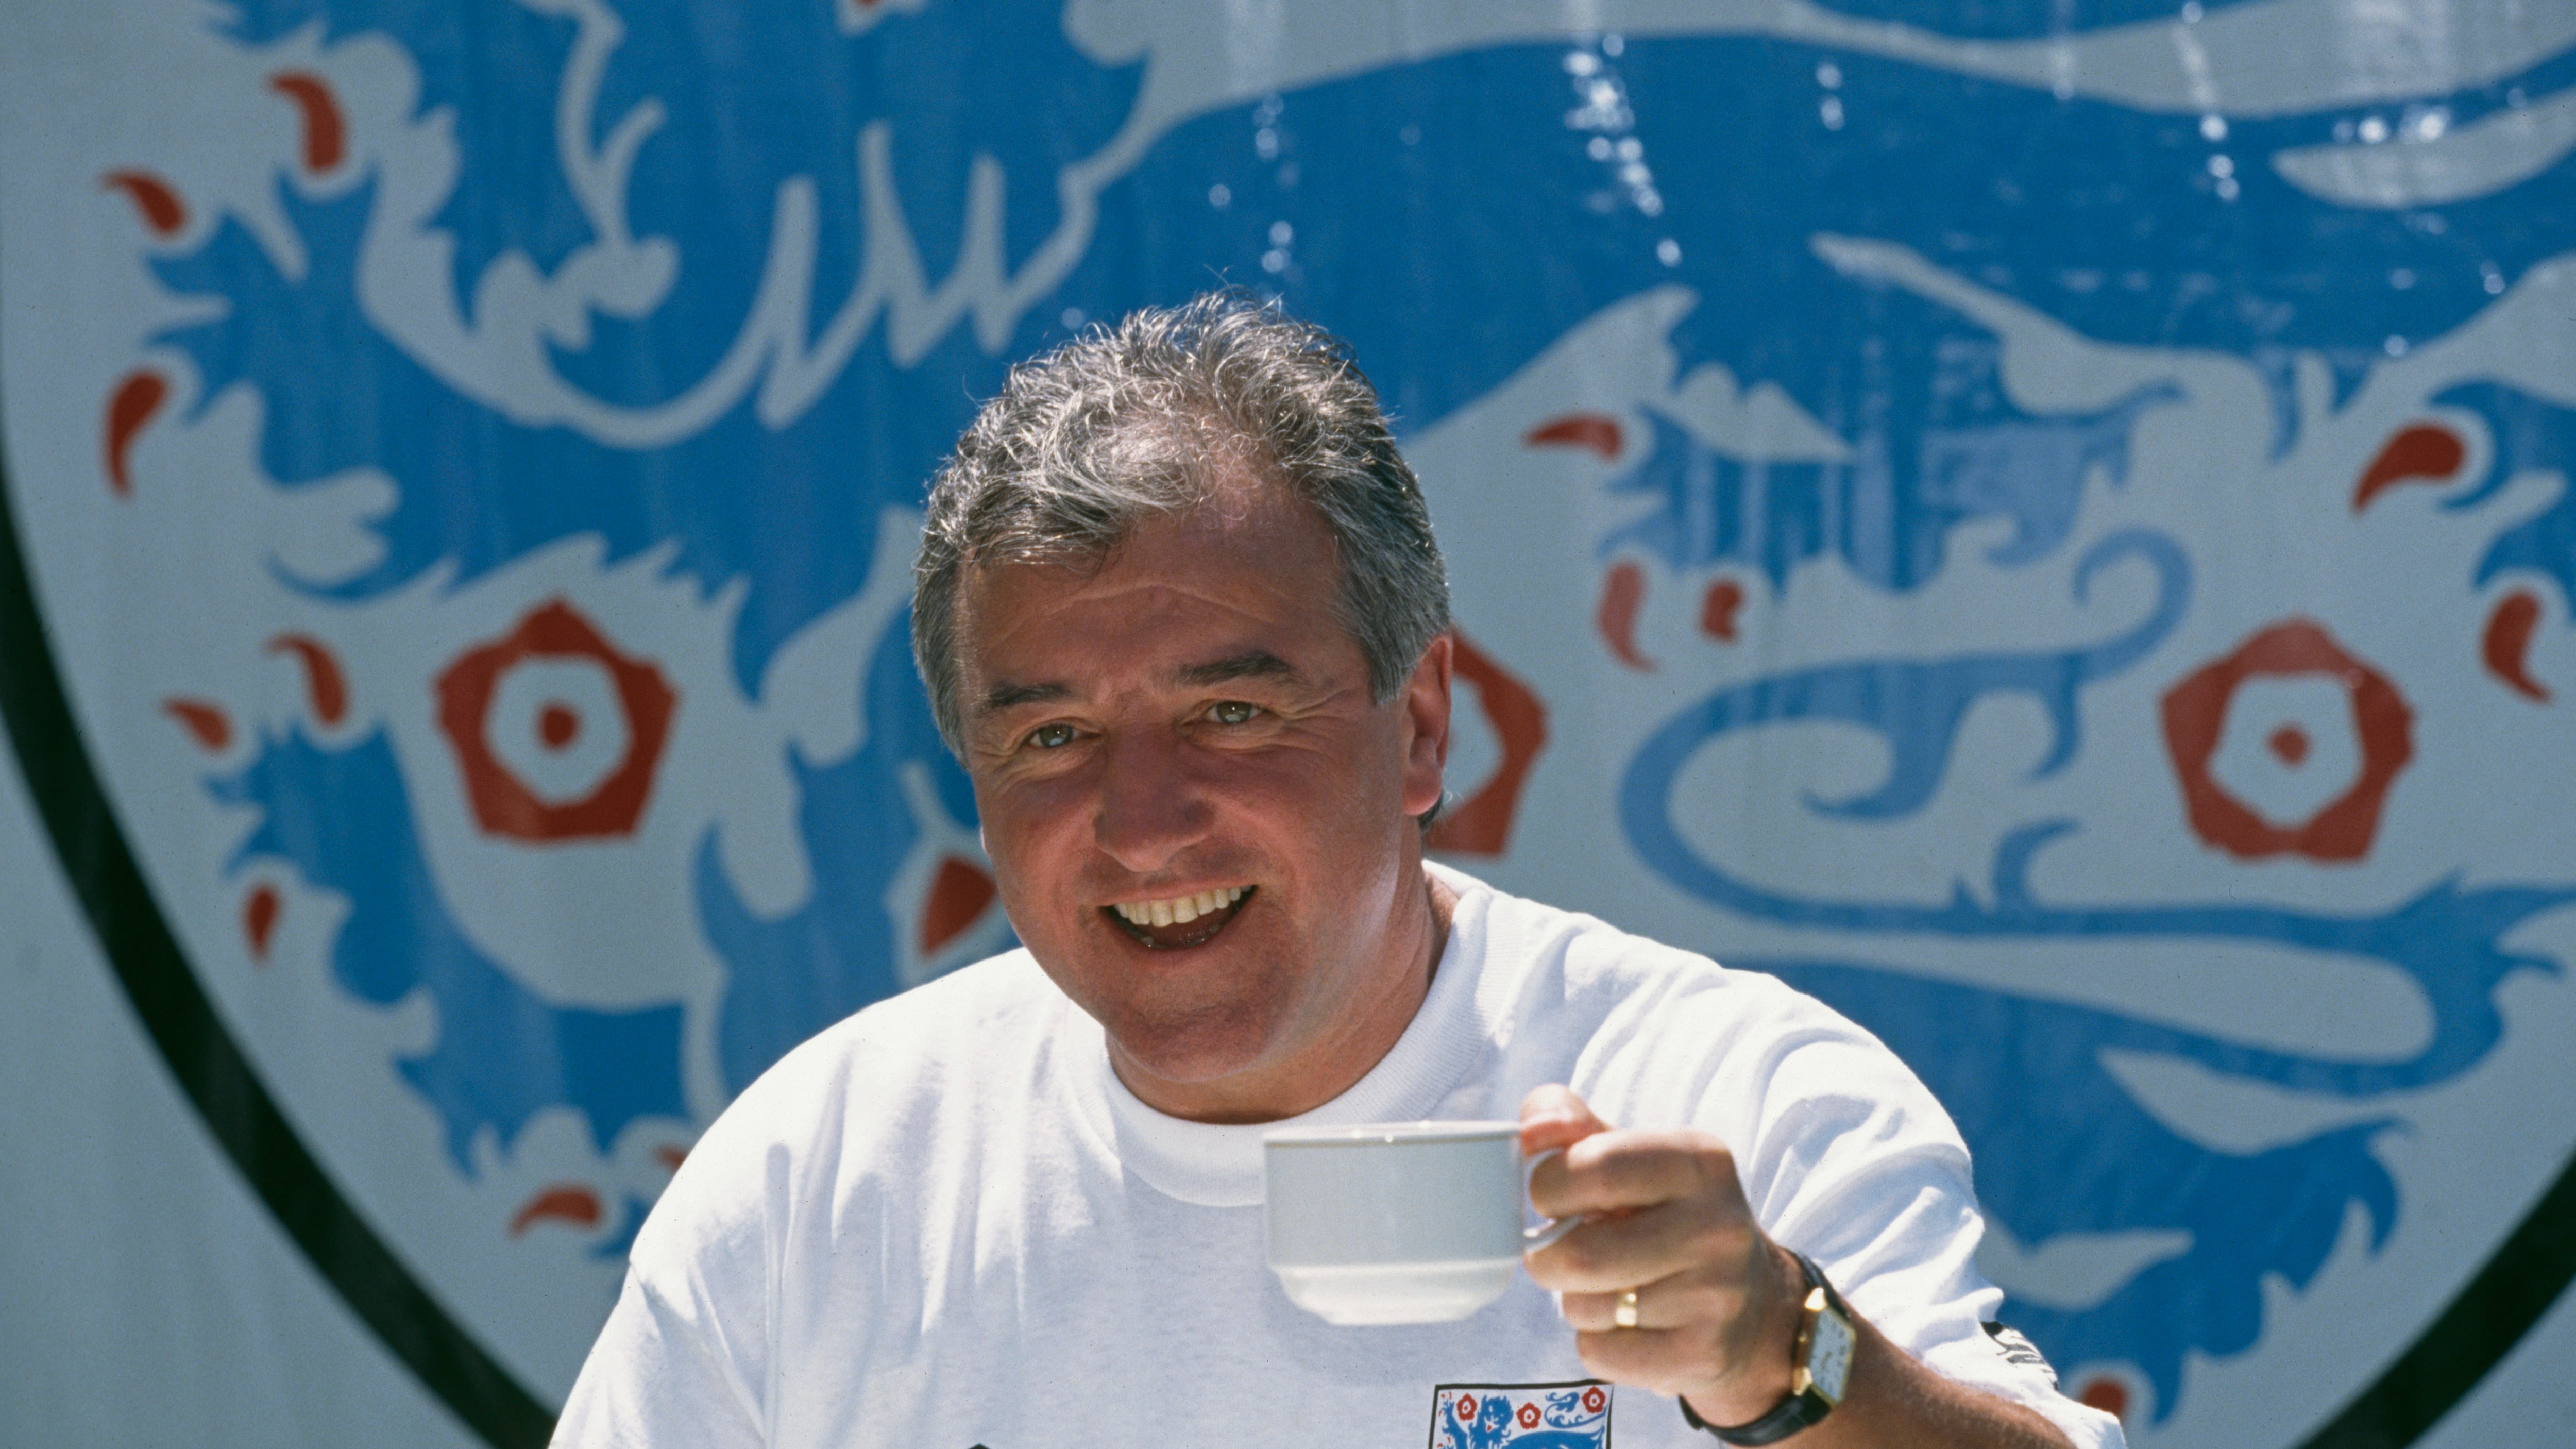 Terry Venables